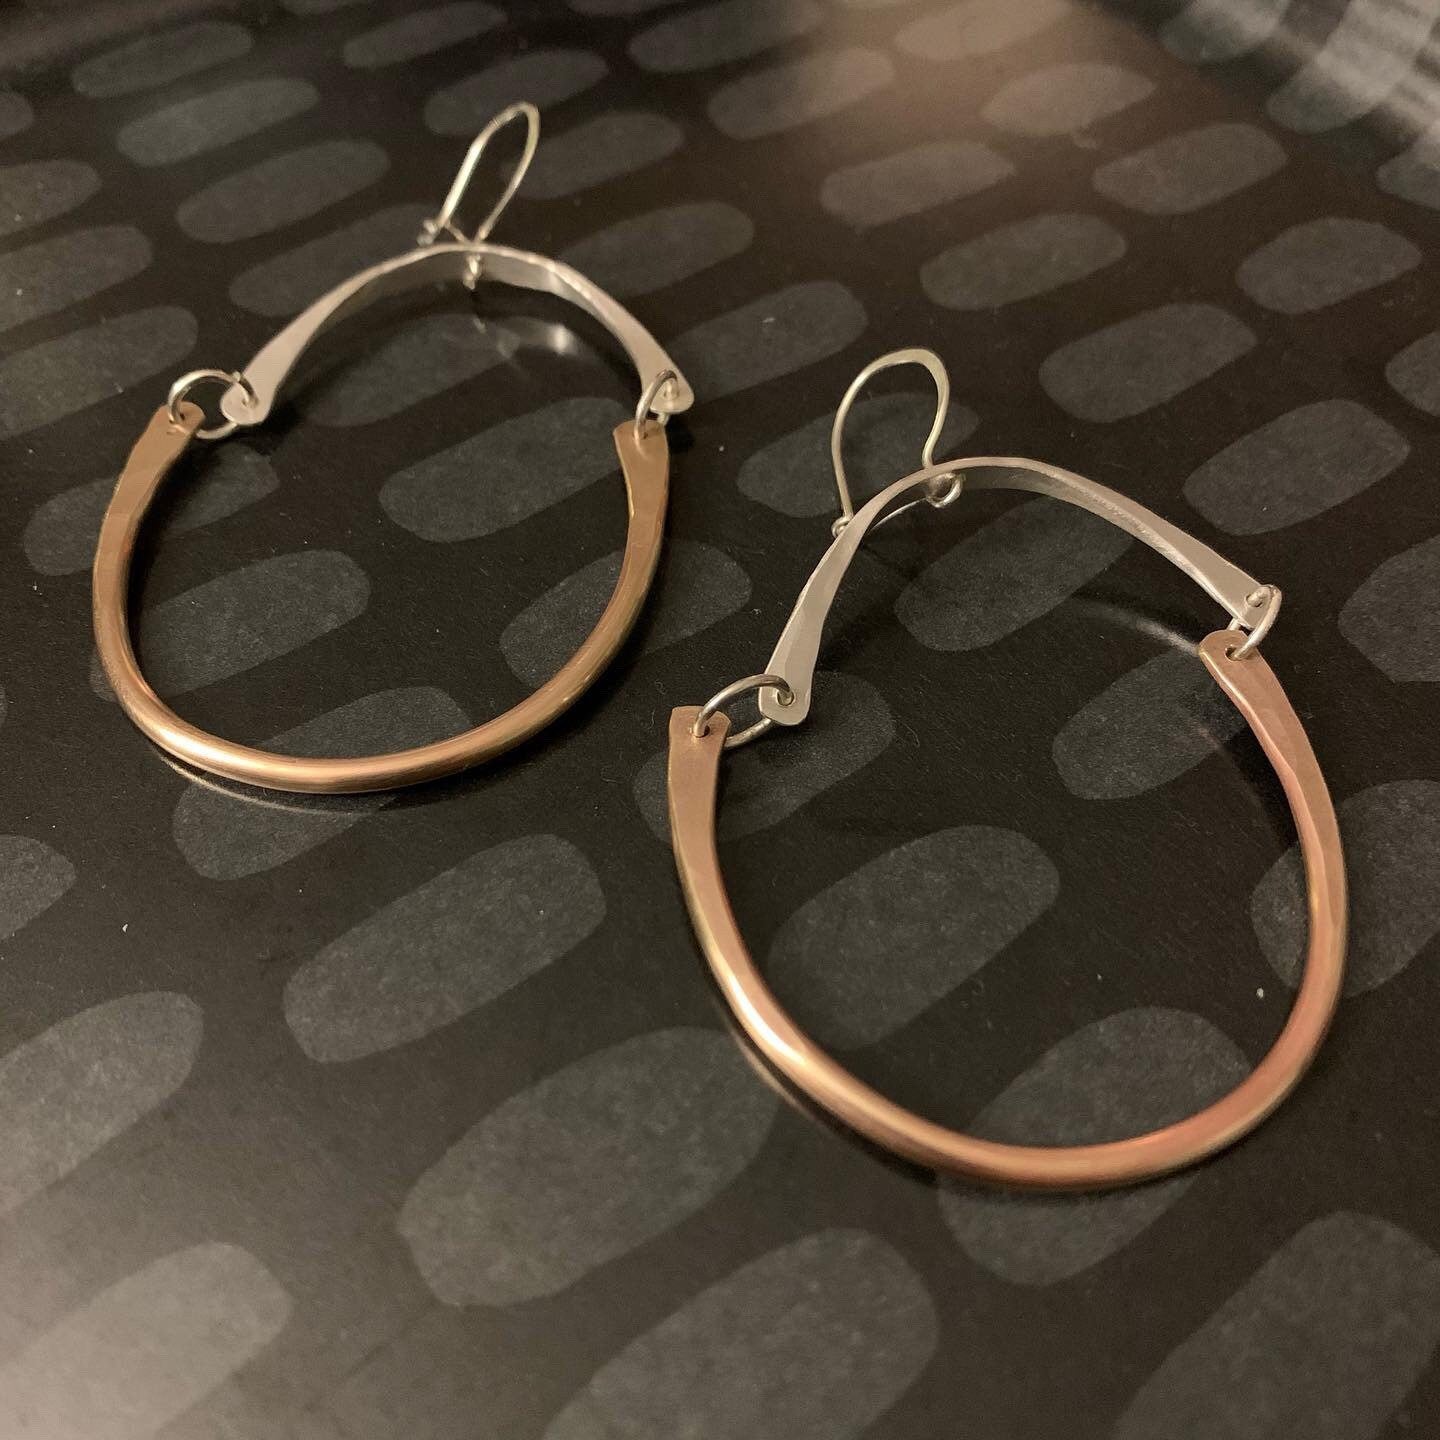 Sterling and brass hoops - handmade jewelry - boho style  - big silver hoops - hand forged metal earrings - gift for her - one of a kind